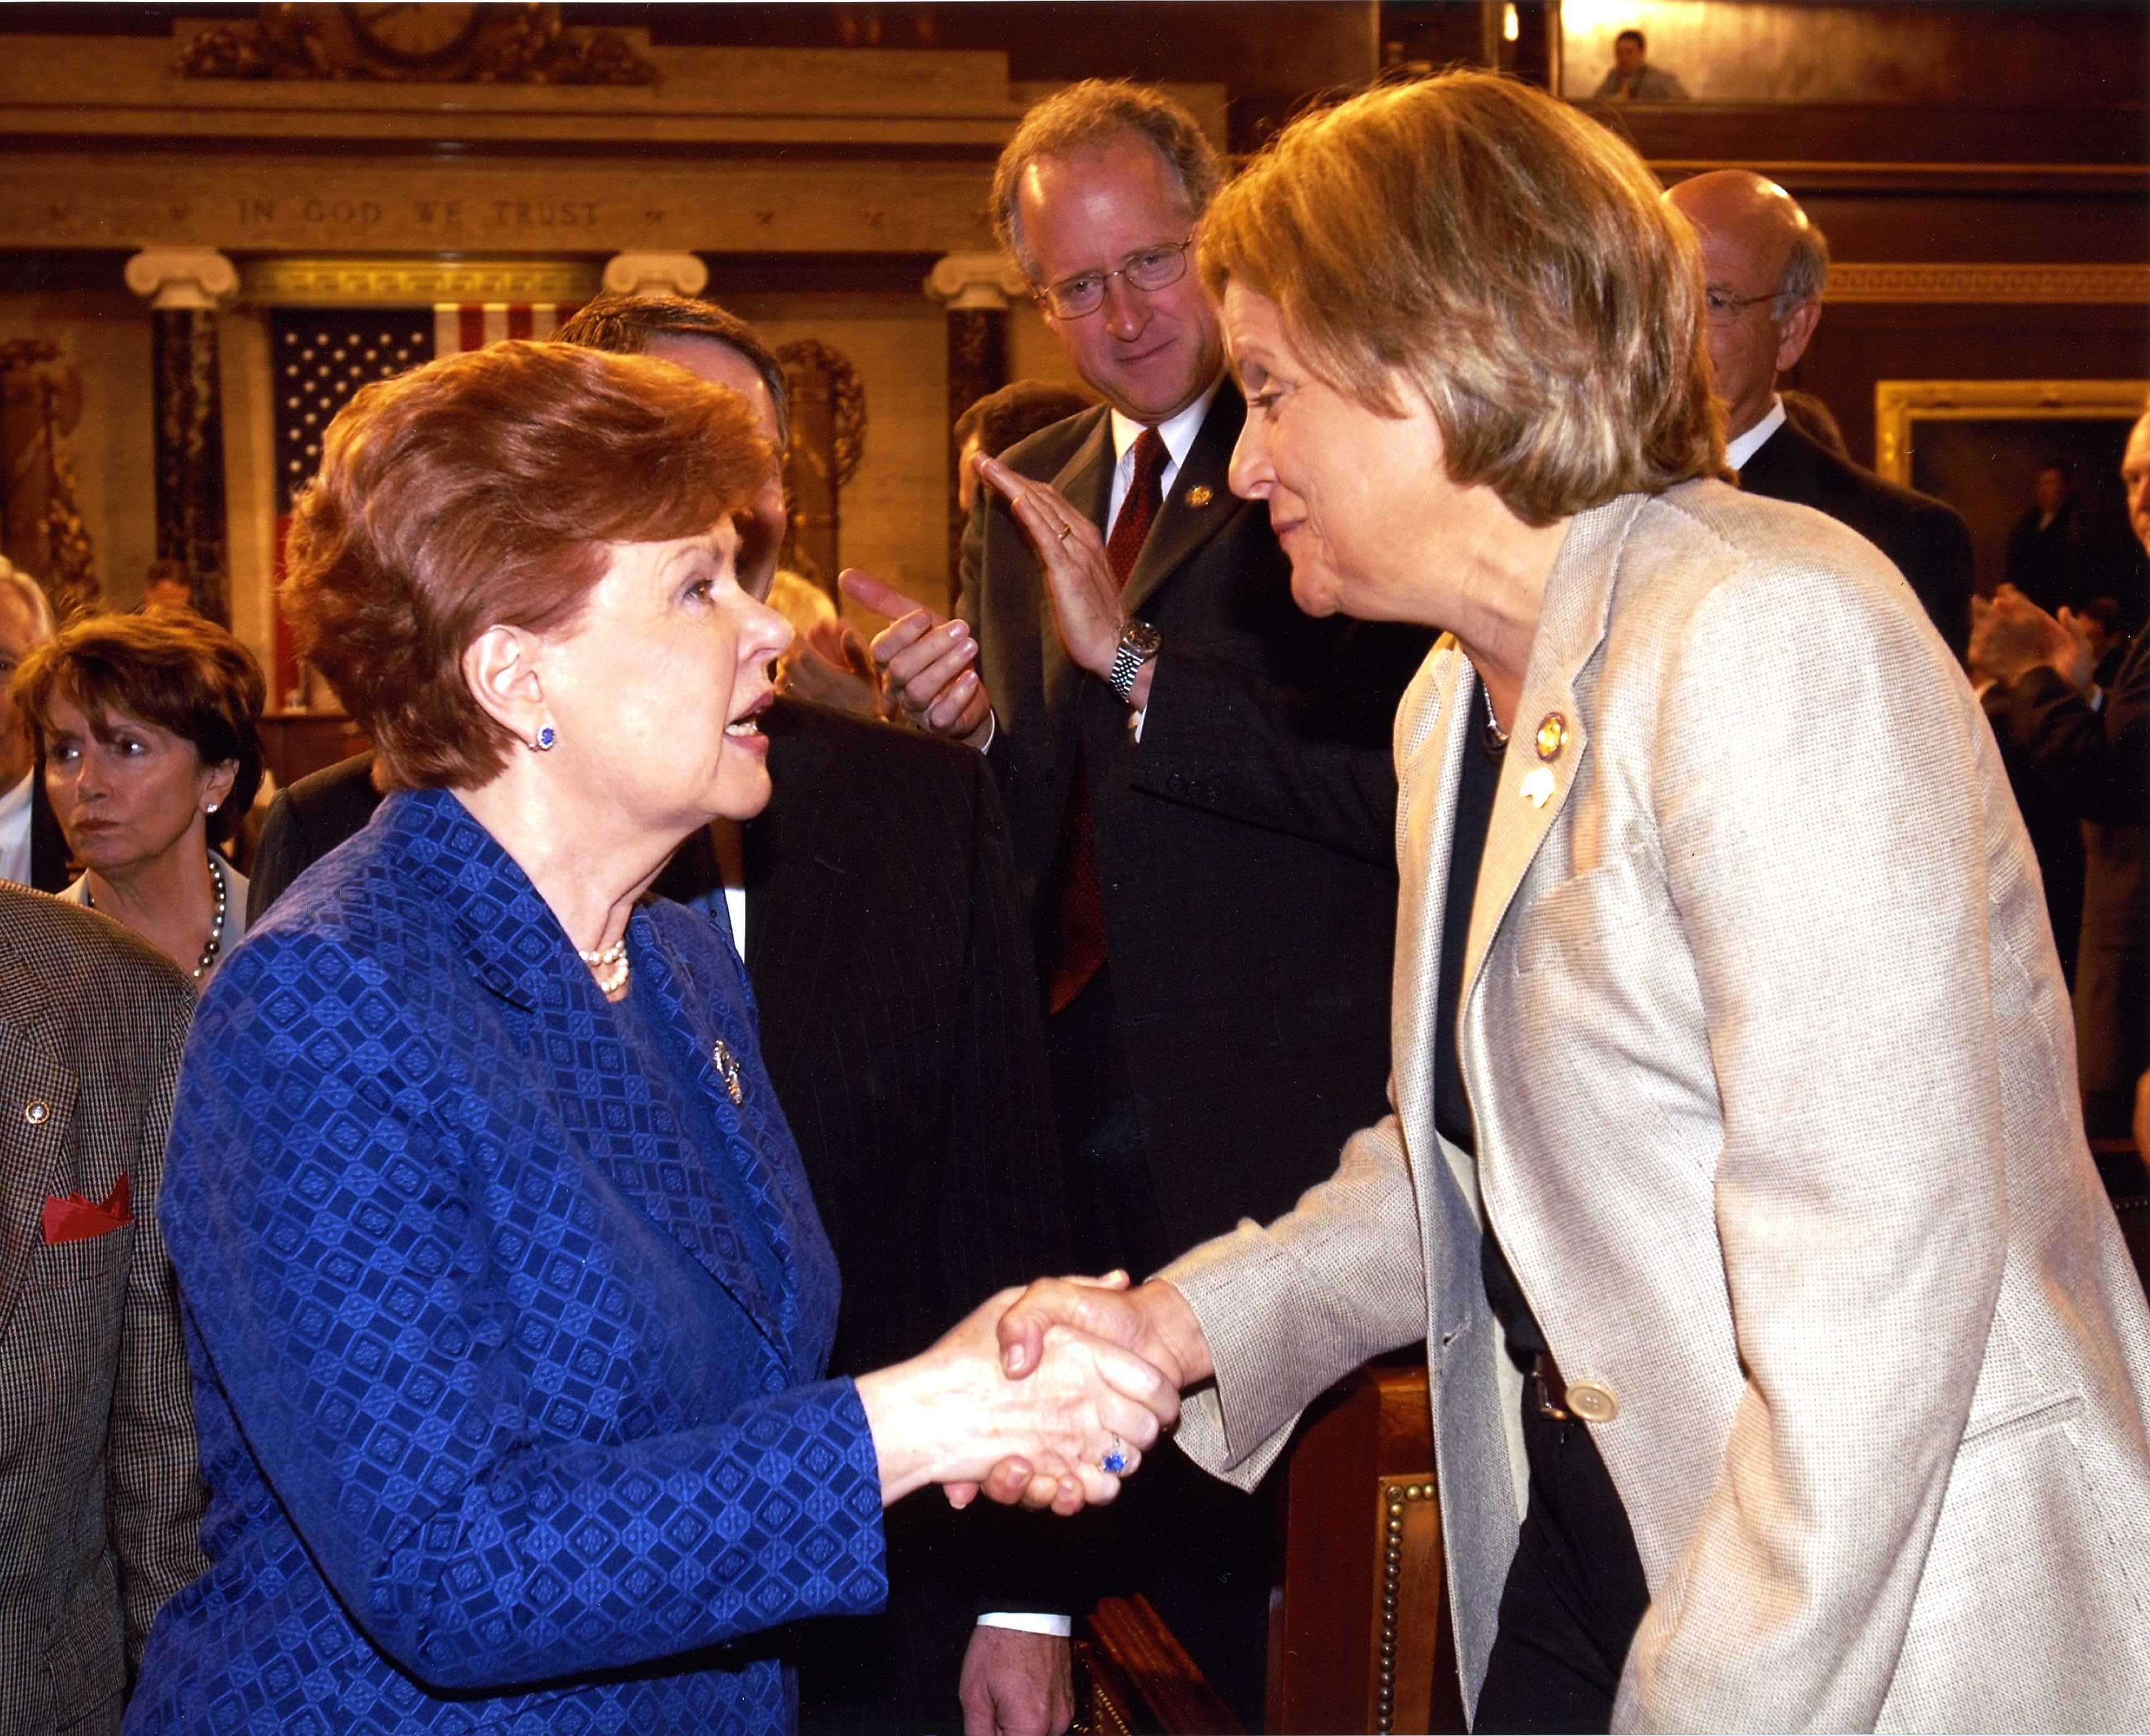 Ranking Member Ros-Lehtinen greets the first female President of the Republic of Latvia, Dr. Vaira Ve-Freiberga after the presidents address before a joint session of Congress